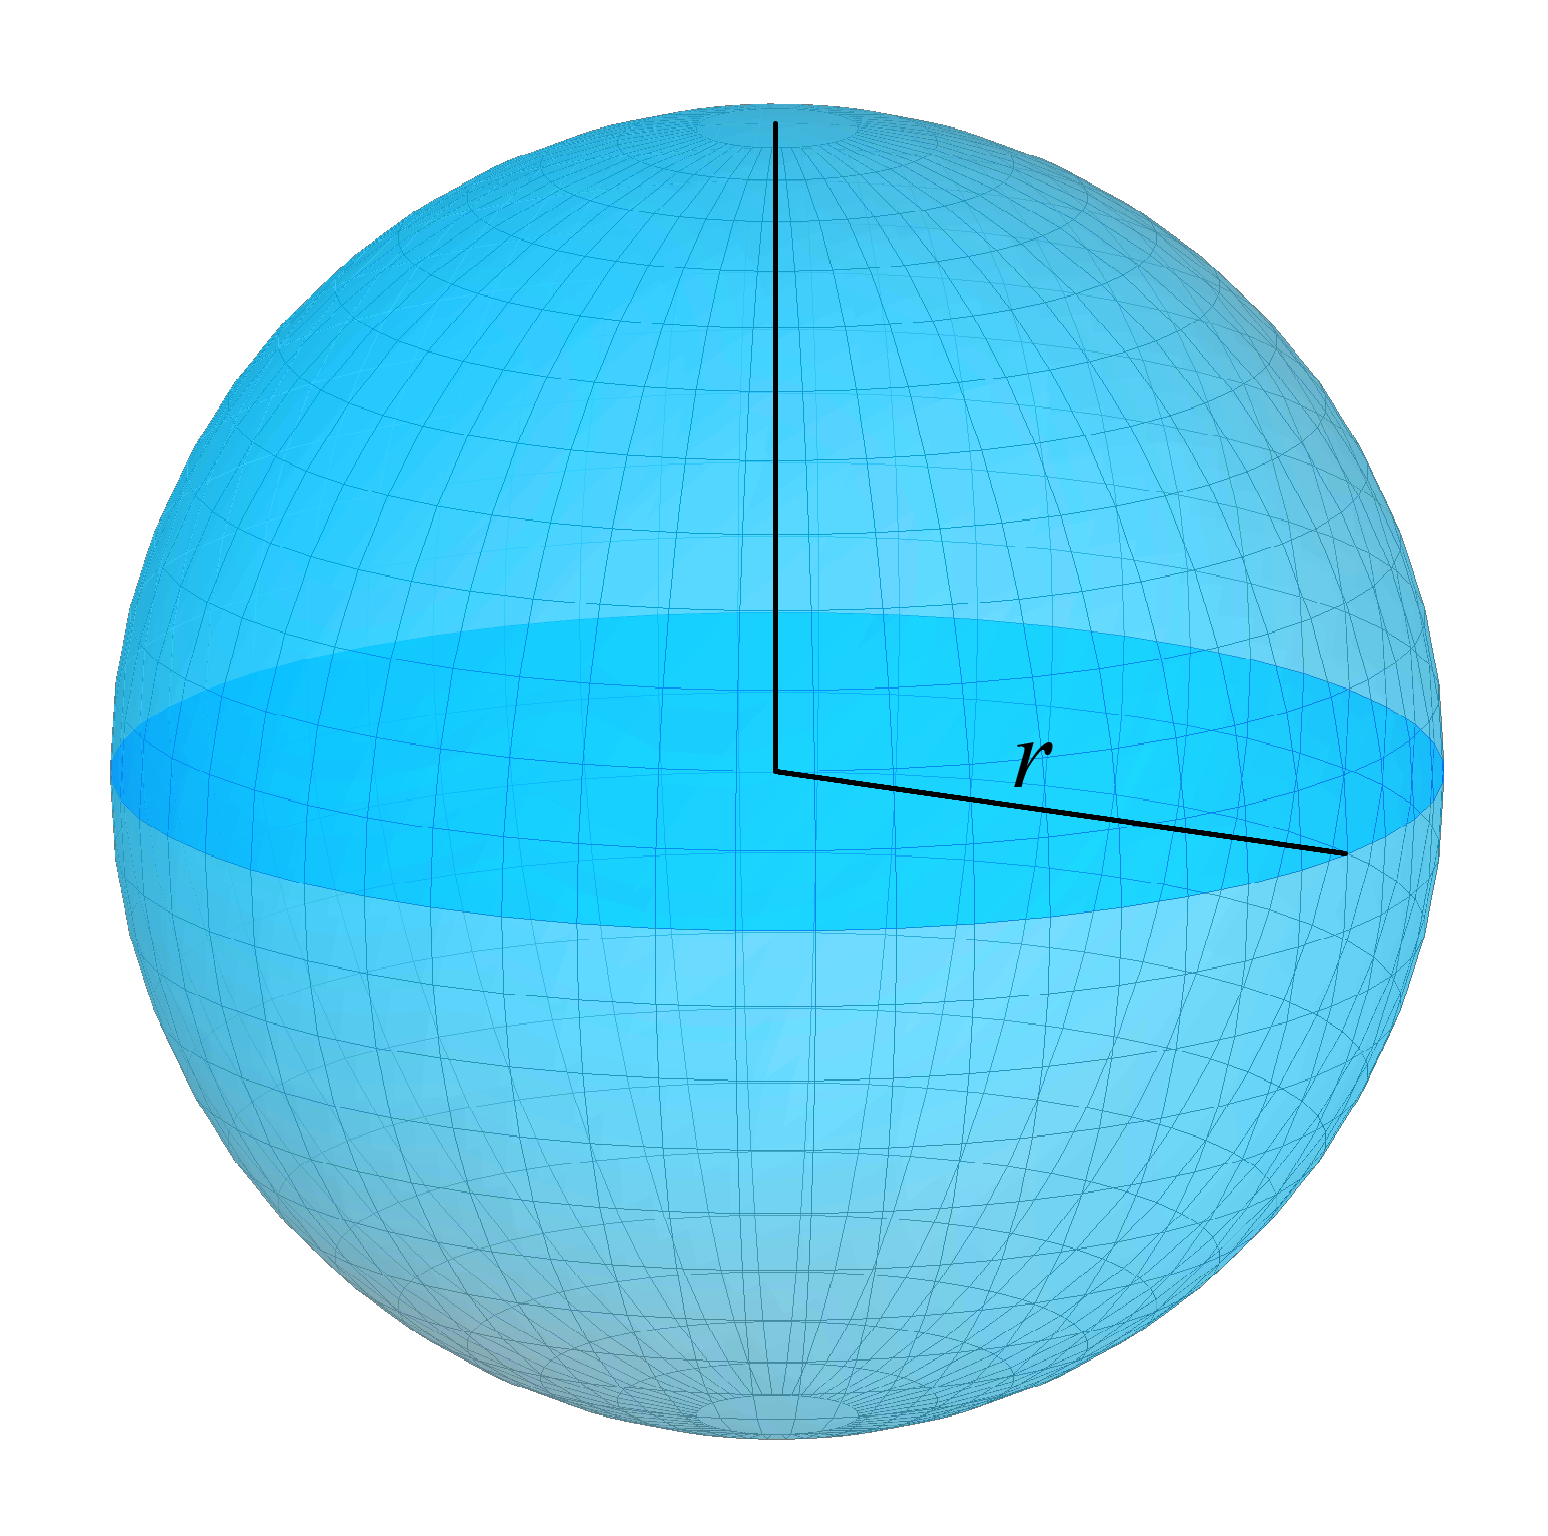 Area of Sphere | Volume of Sphere - Definitions & Examples